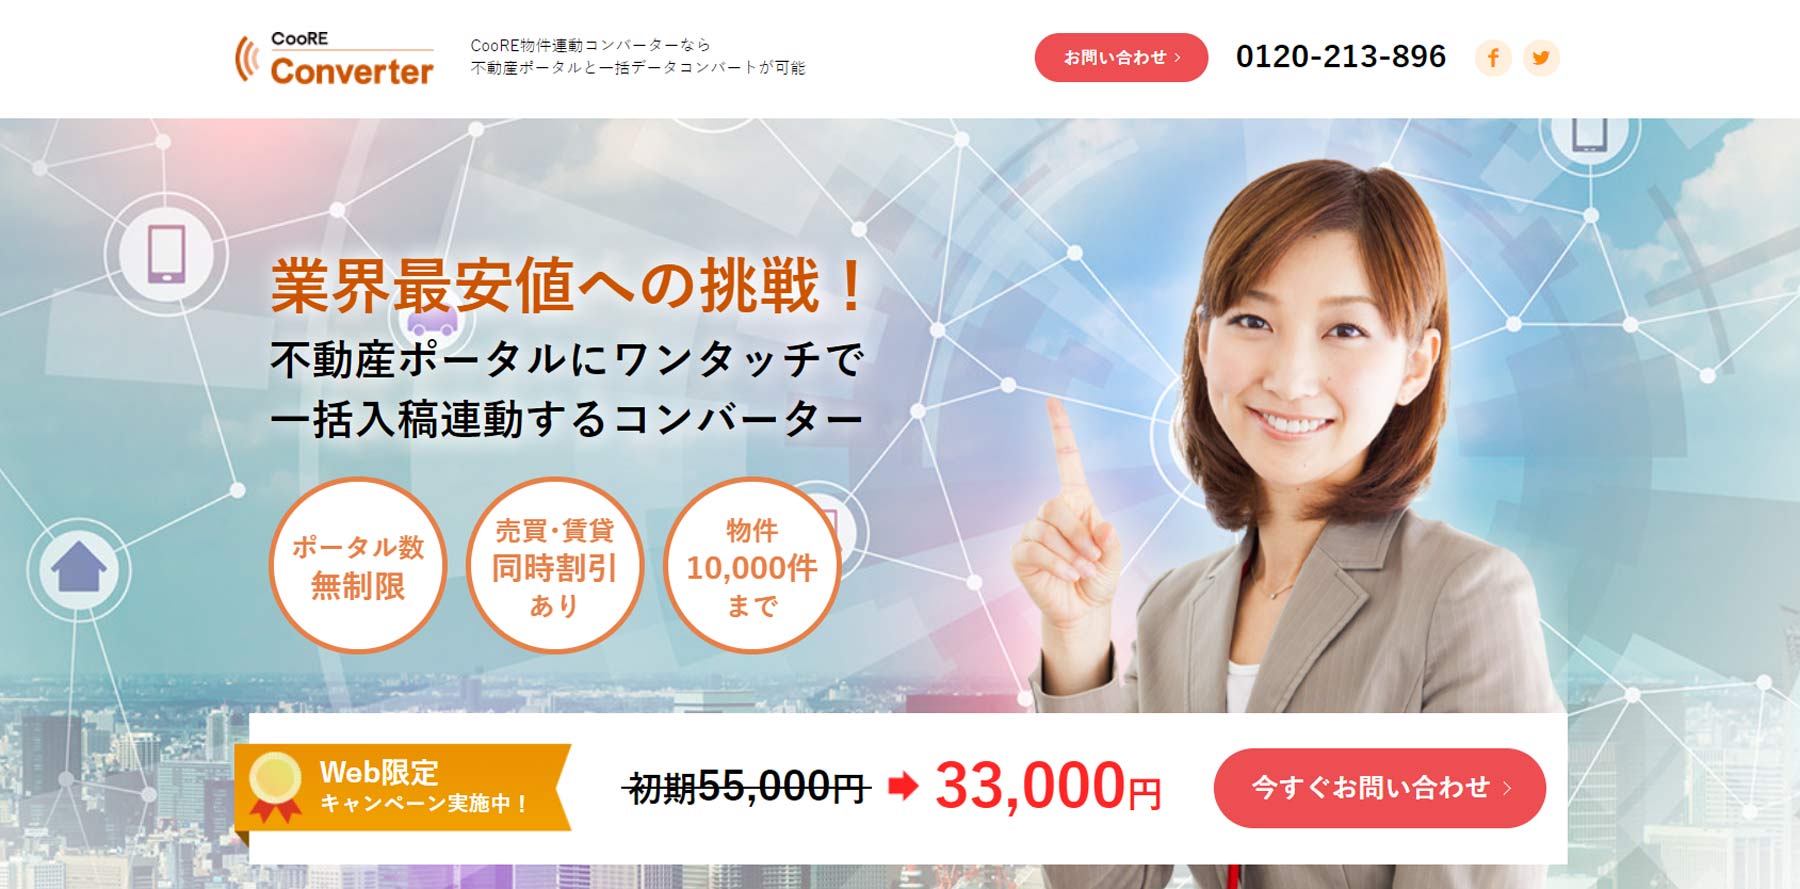 CooRE物件連動コンバーター公式Webサイト